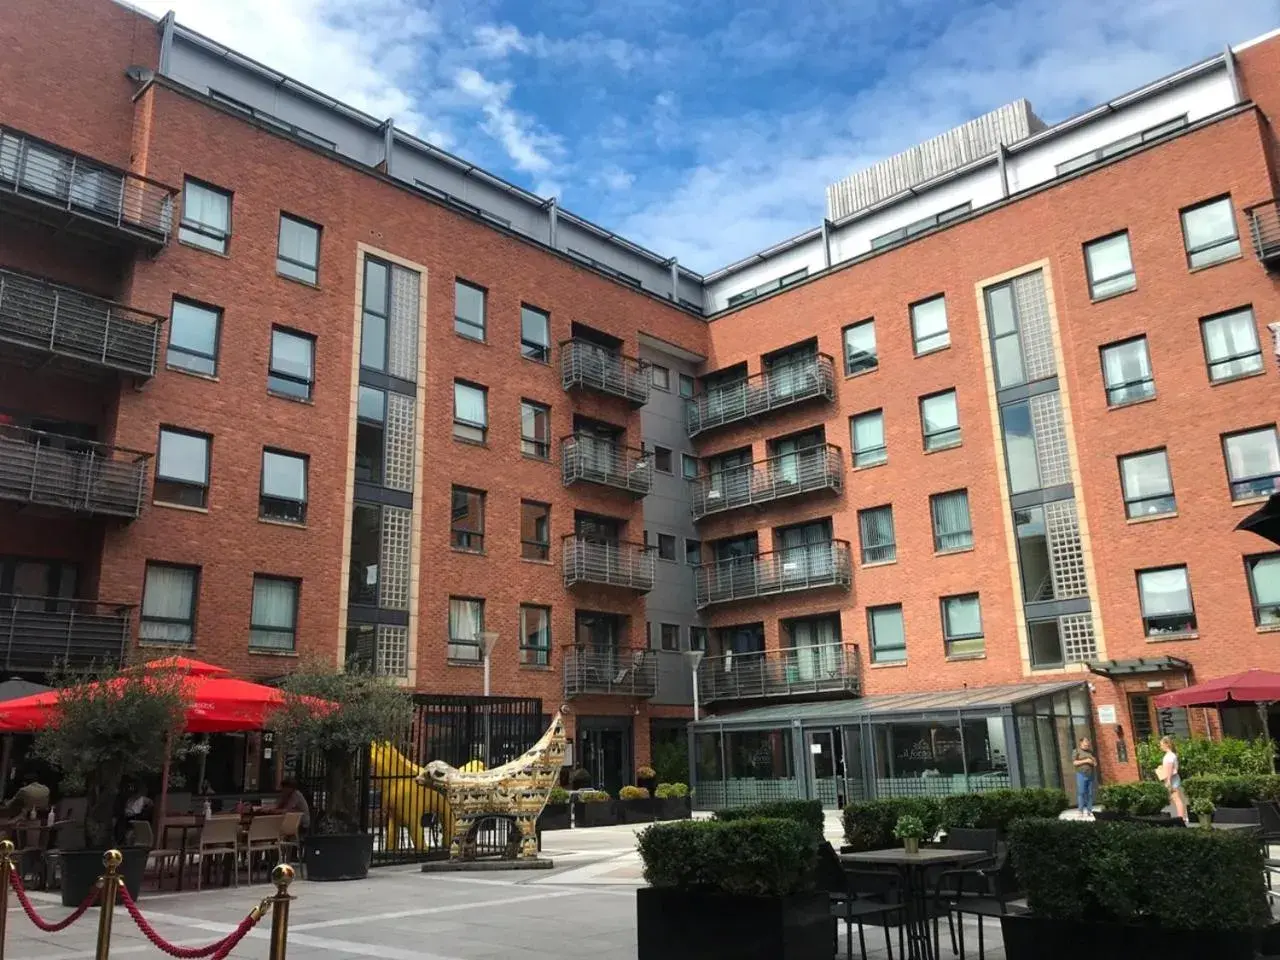 Property Building in Base Serviced Apartments - Duke Street